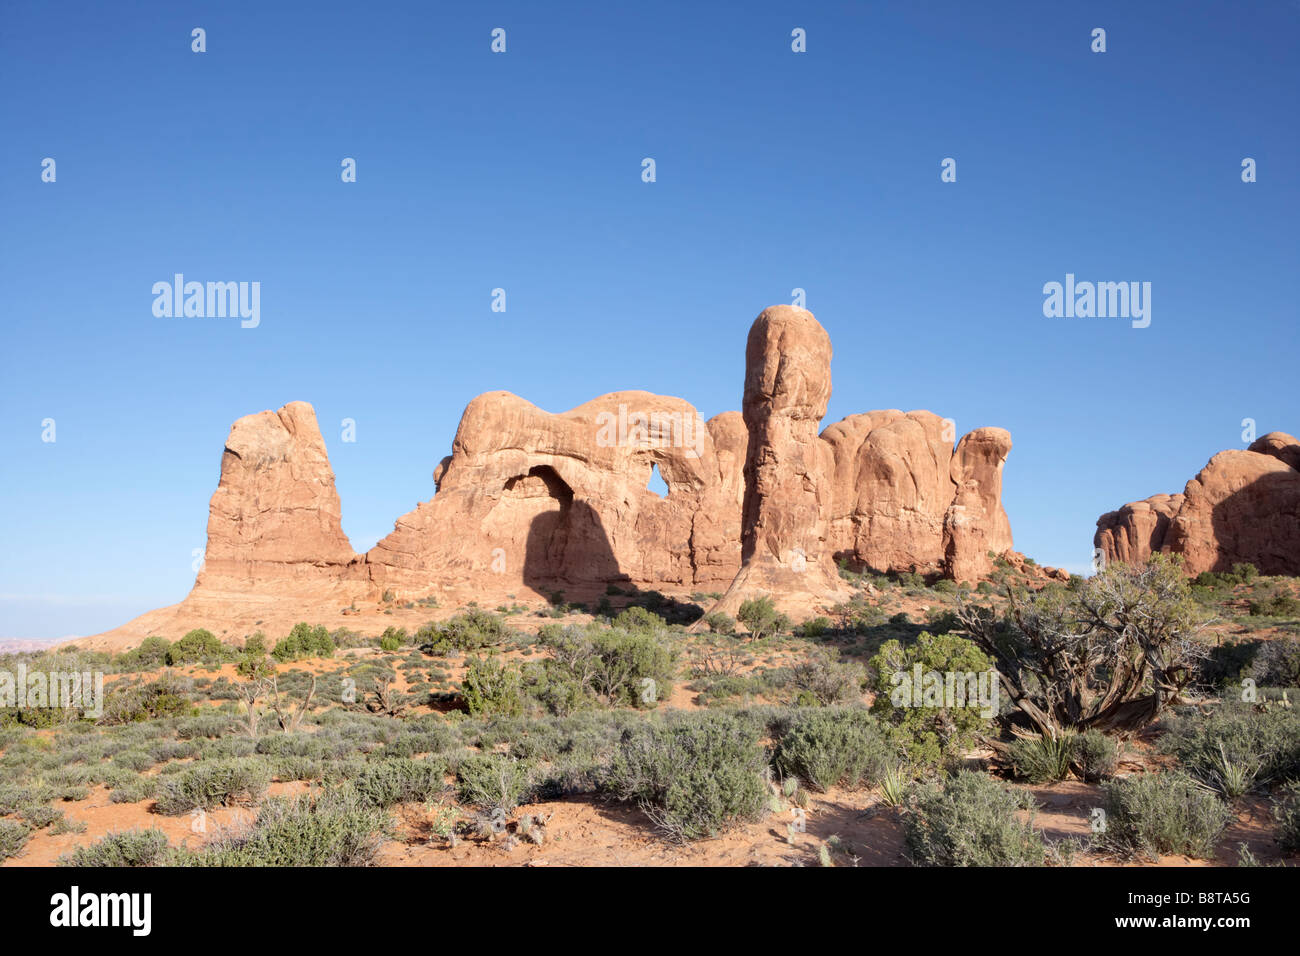 Parade of Elephants in Arches National Park Utah USA Stock Photo